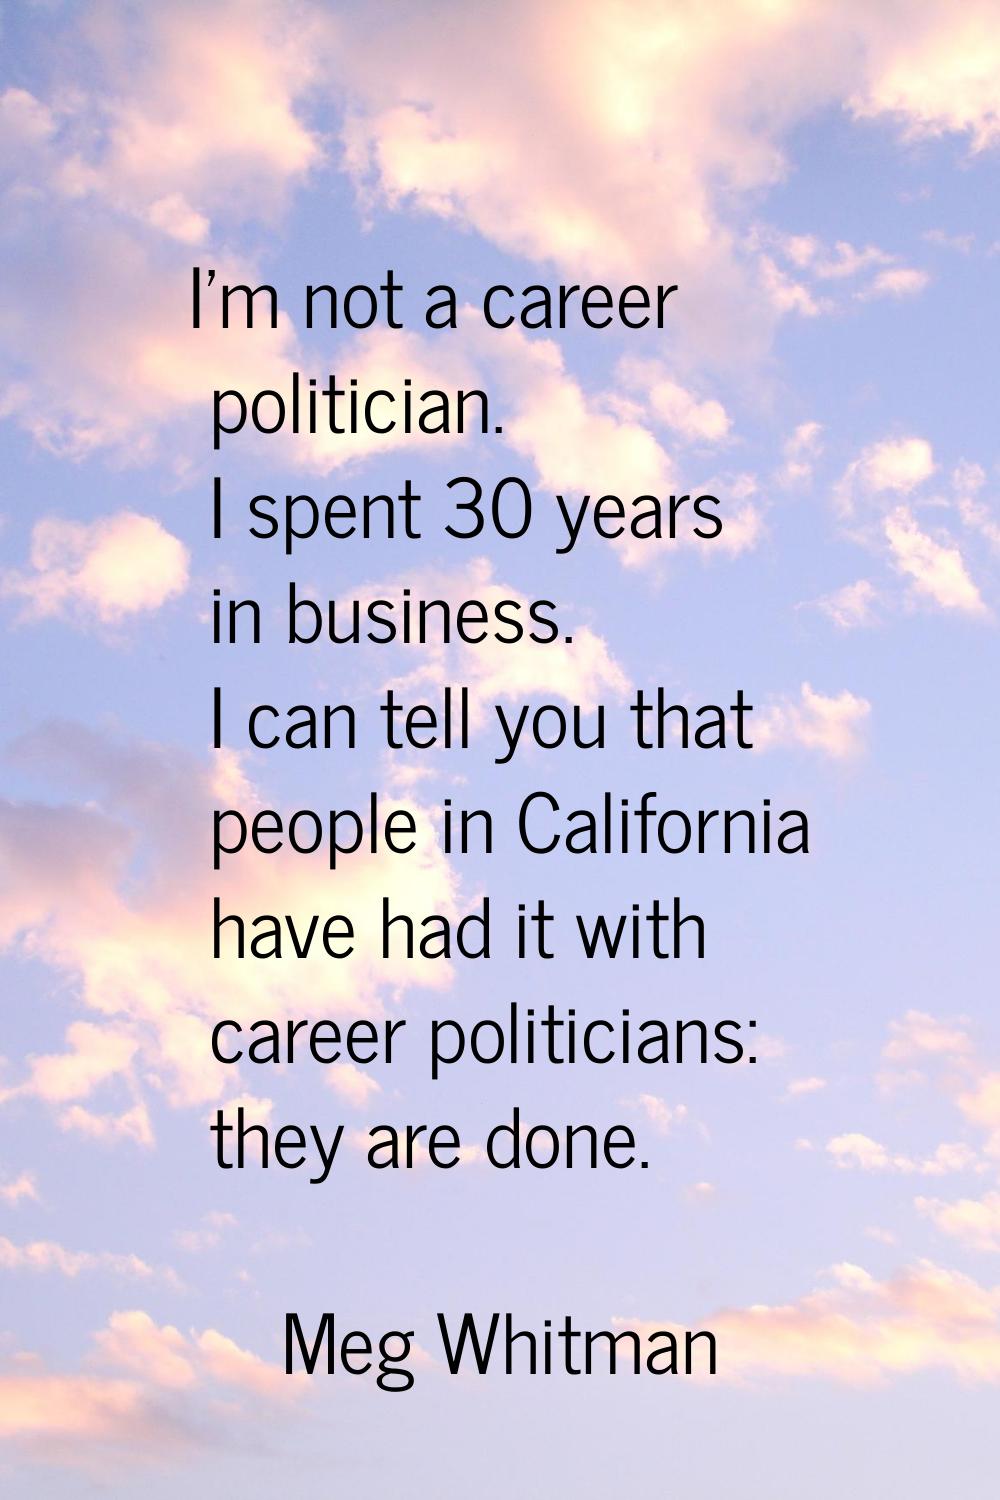 I'm not a career politician. I spent 30 years in business. I can tell you that people in California